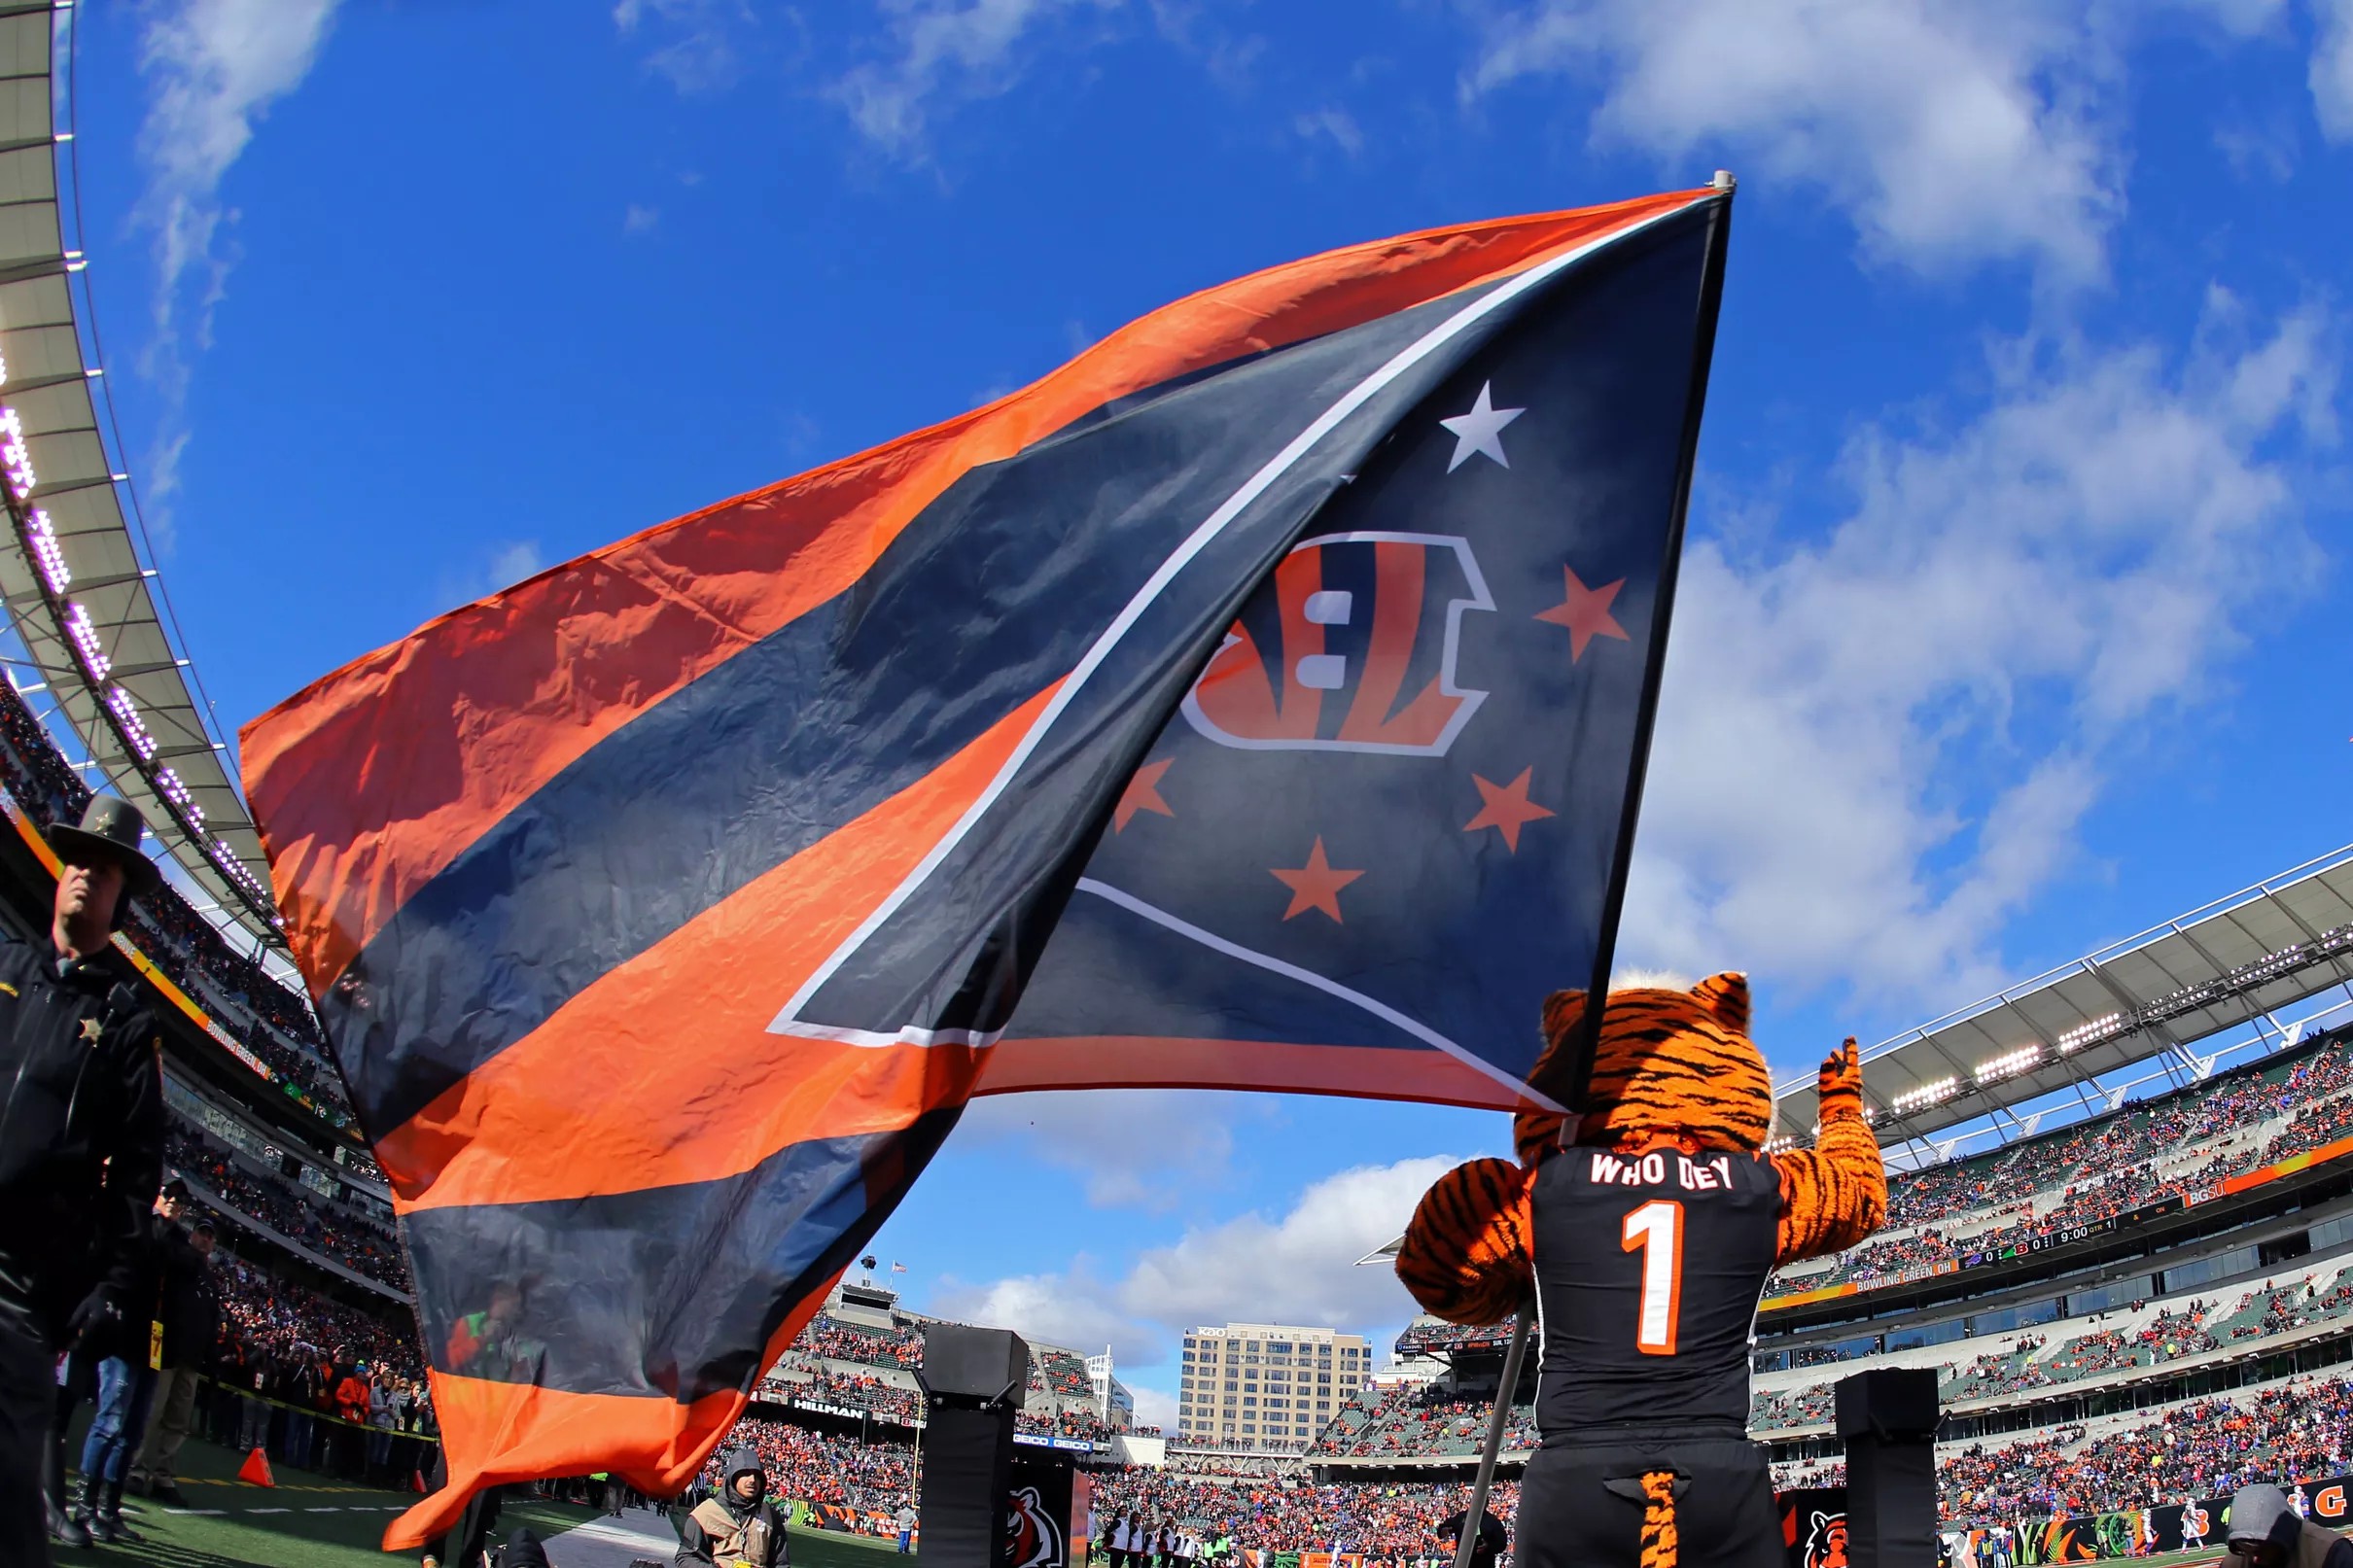 Cincy Jungle Q&A: NFL Draft, Bengals free agency and more